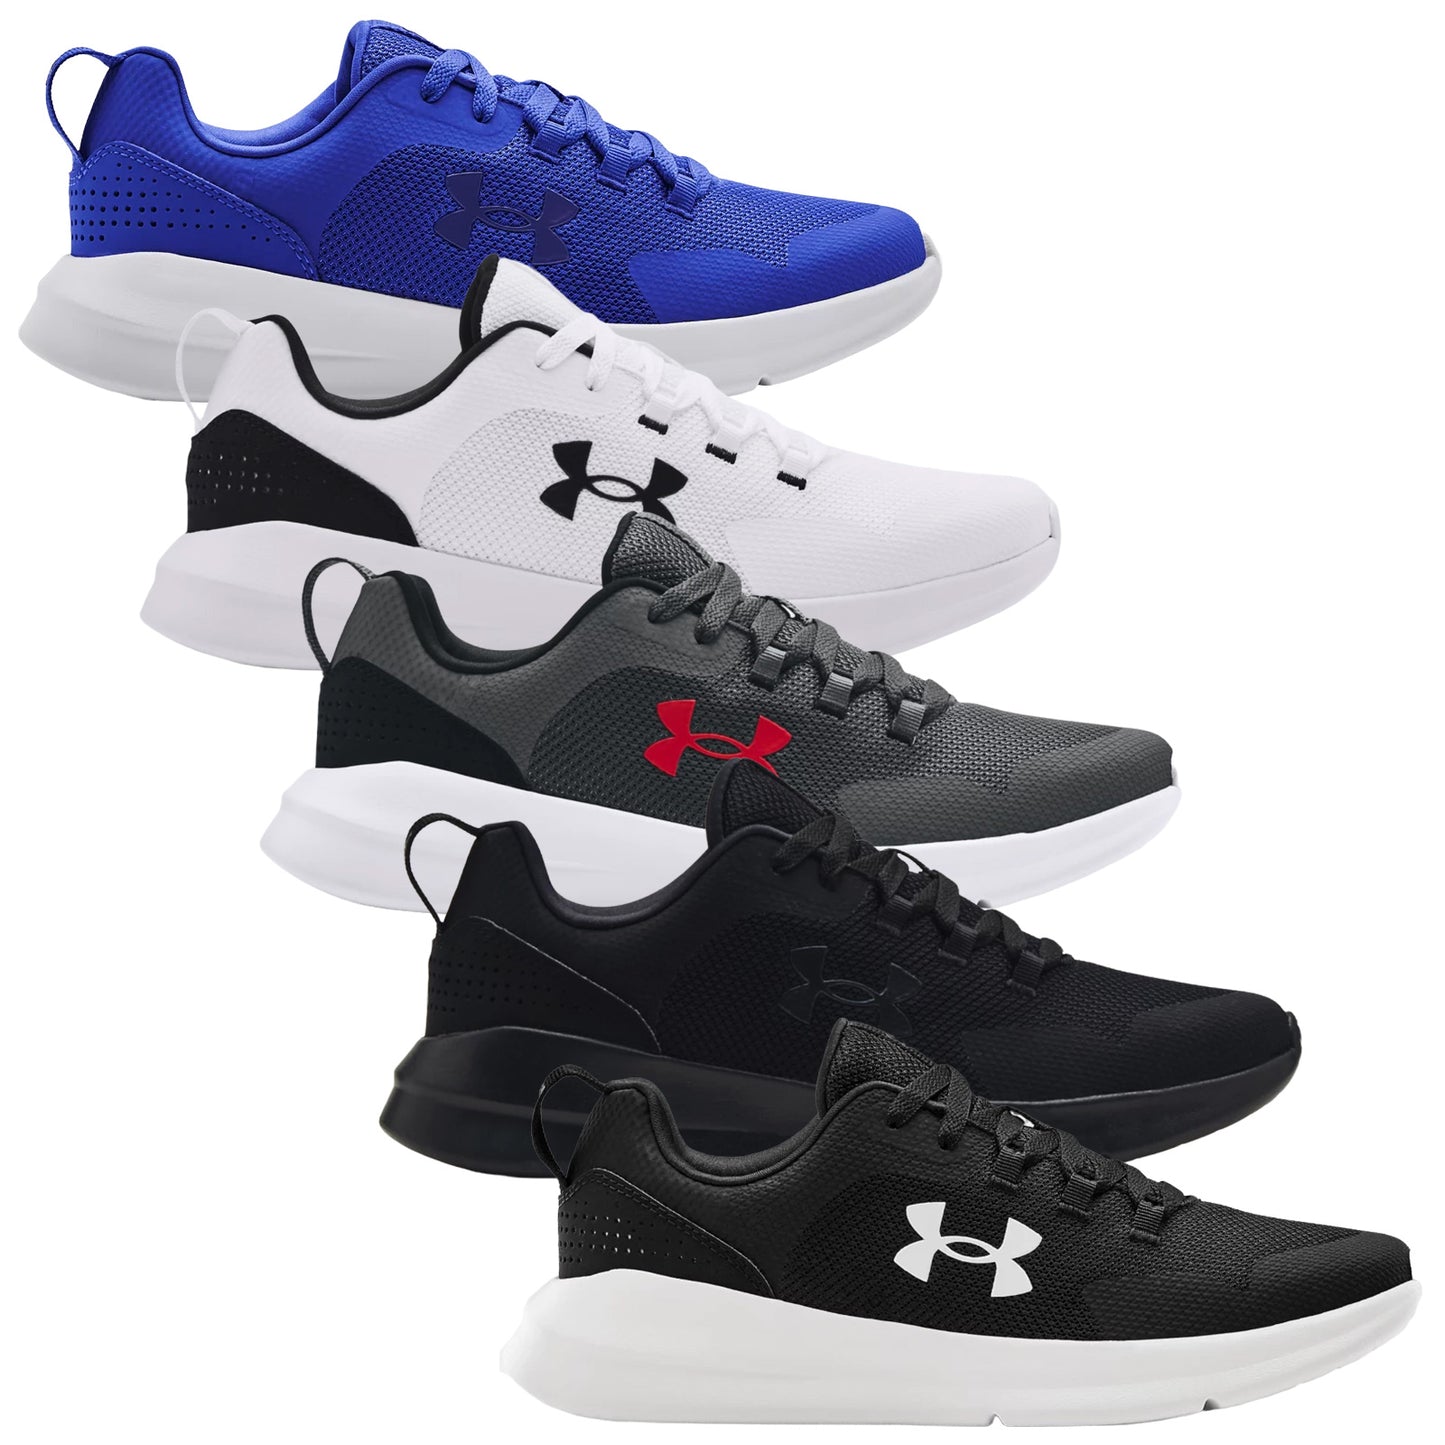 Under Armour Mens Essential Sportstyle Trainers